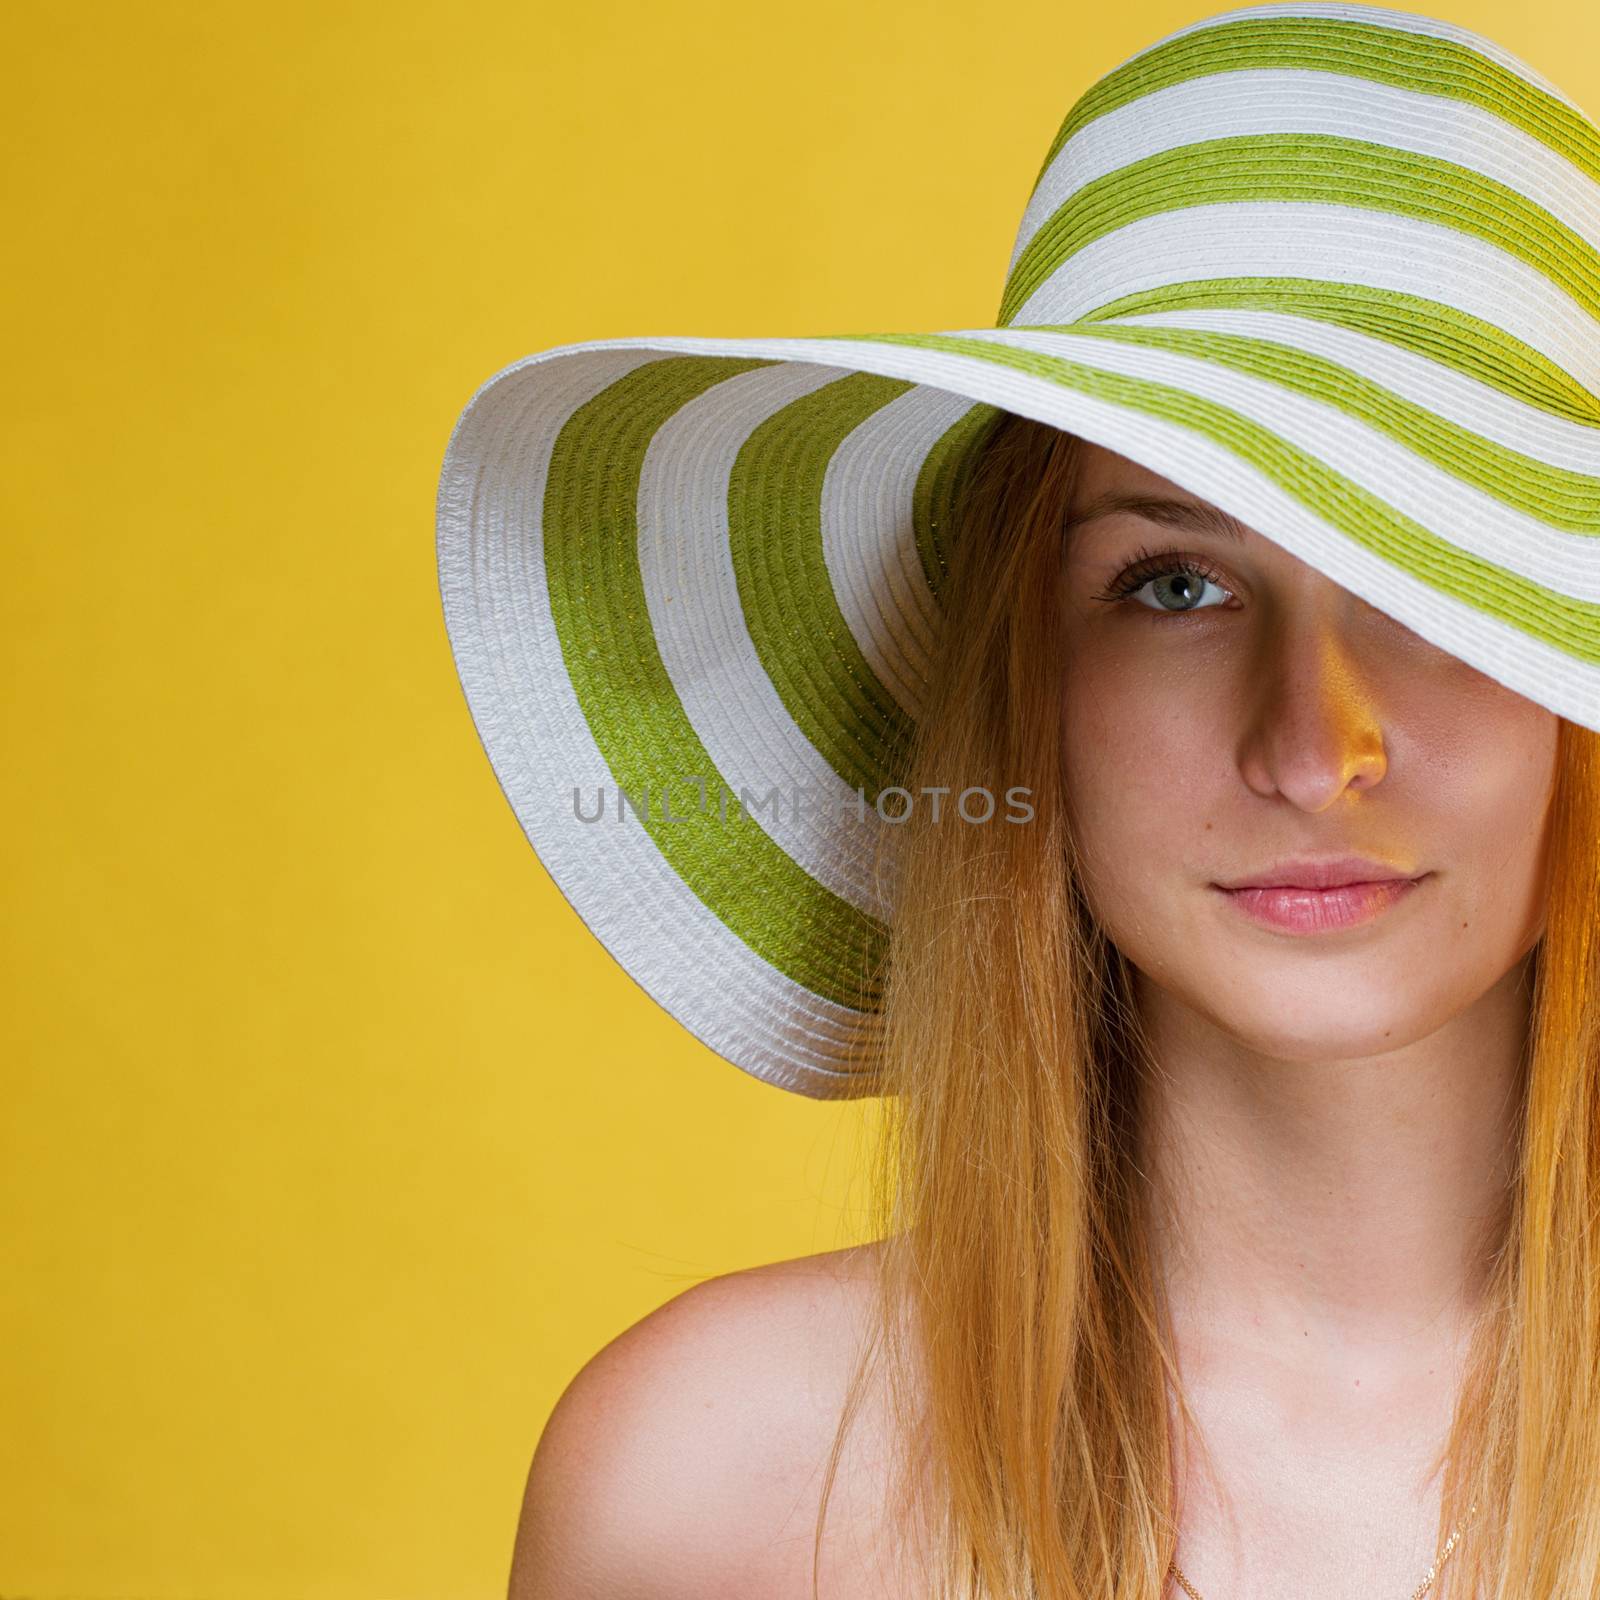 young pretty girl with a hat on her head. Yellow background. square crop